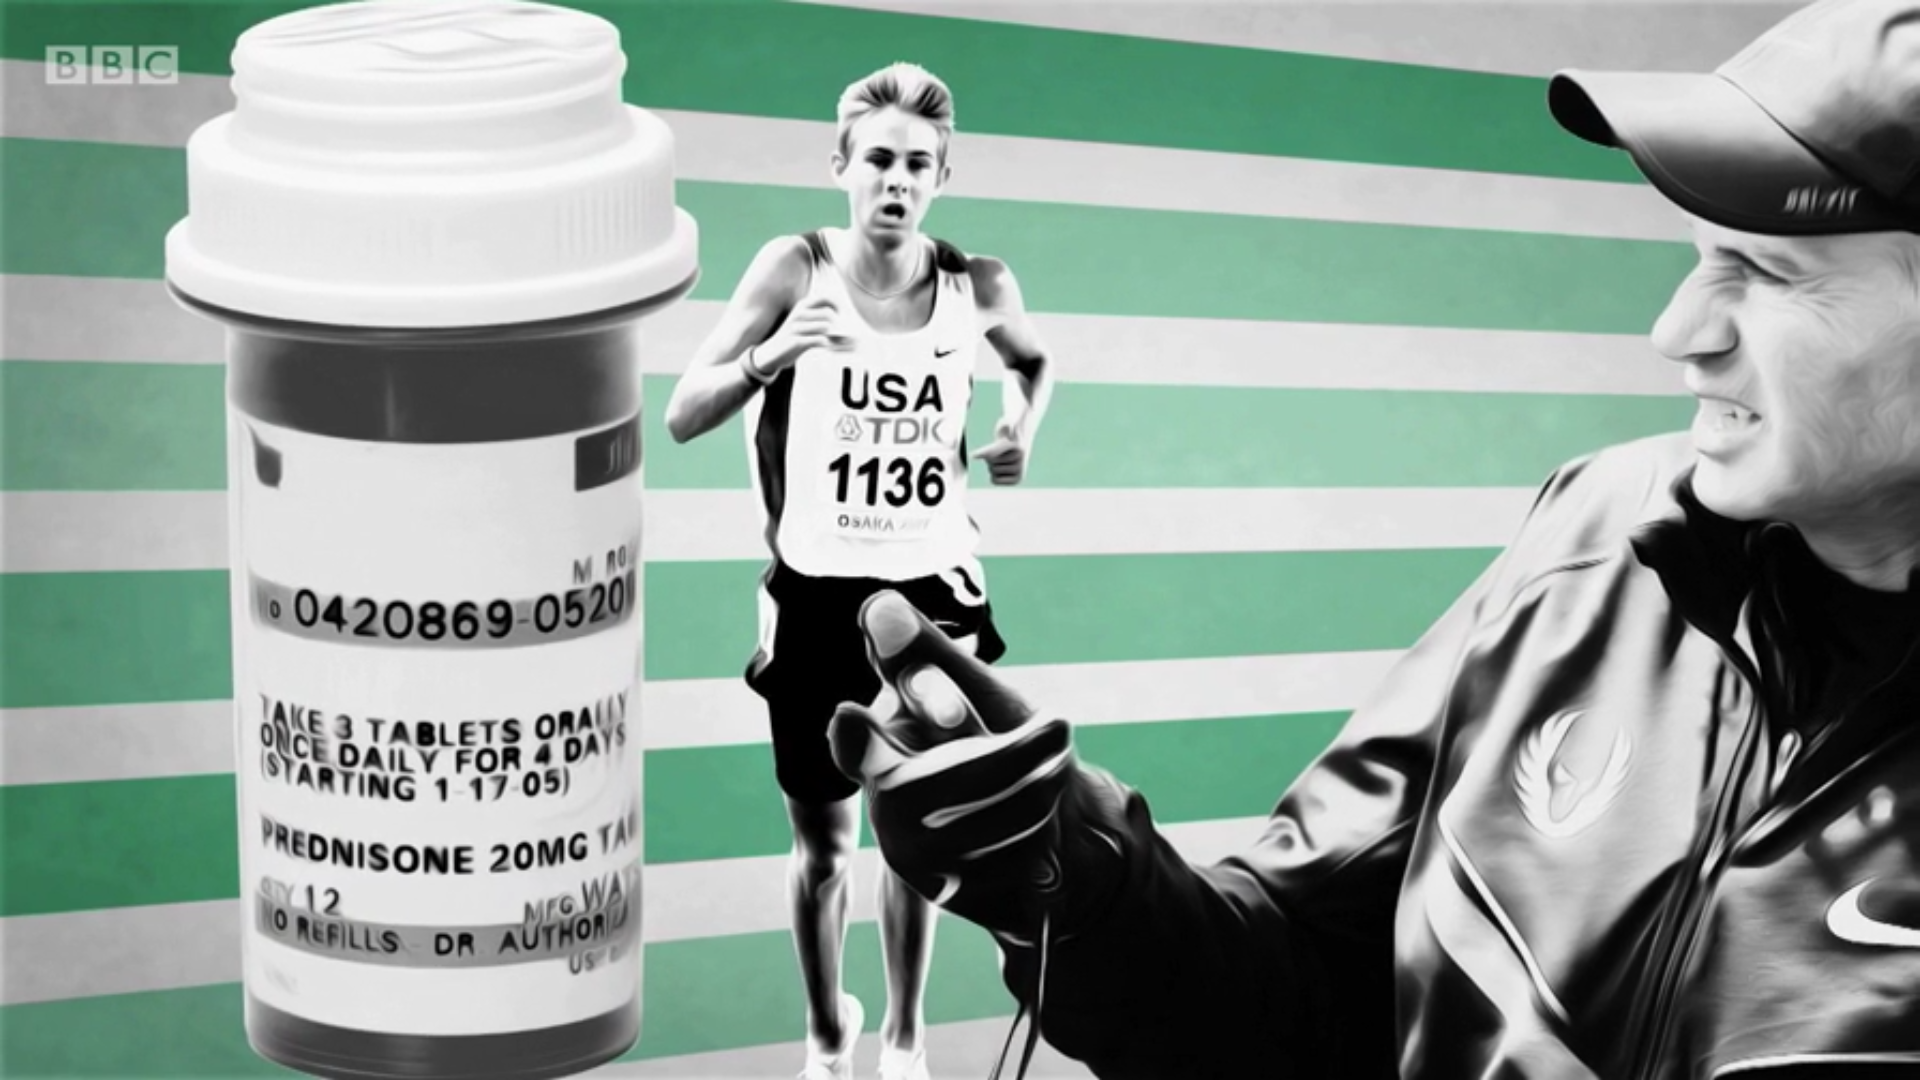 Everything You Want to Know About the BBC Nike Oregon Project Doping ...